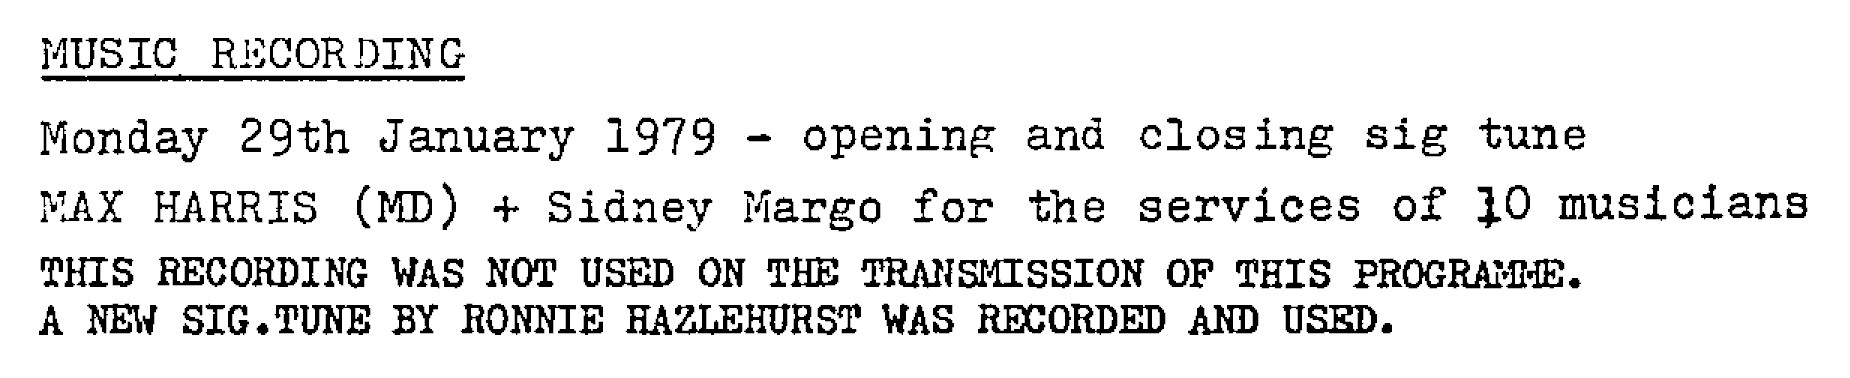 
MUSIC RECORDING
Monday 29th January 1979 - opening and closing sig tune
MAX HARRIS (MD) + Sidney Margo for the services of 10 musicians
THIS RECORDING WAS NOT USED ON THE TRANSMISSION OF THIS PROGRAMME.
A NEW SIG.TUNE BY RONNIE HAZLEHURST WAS RECORDED AND USED.